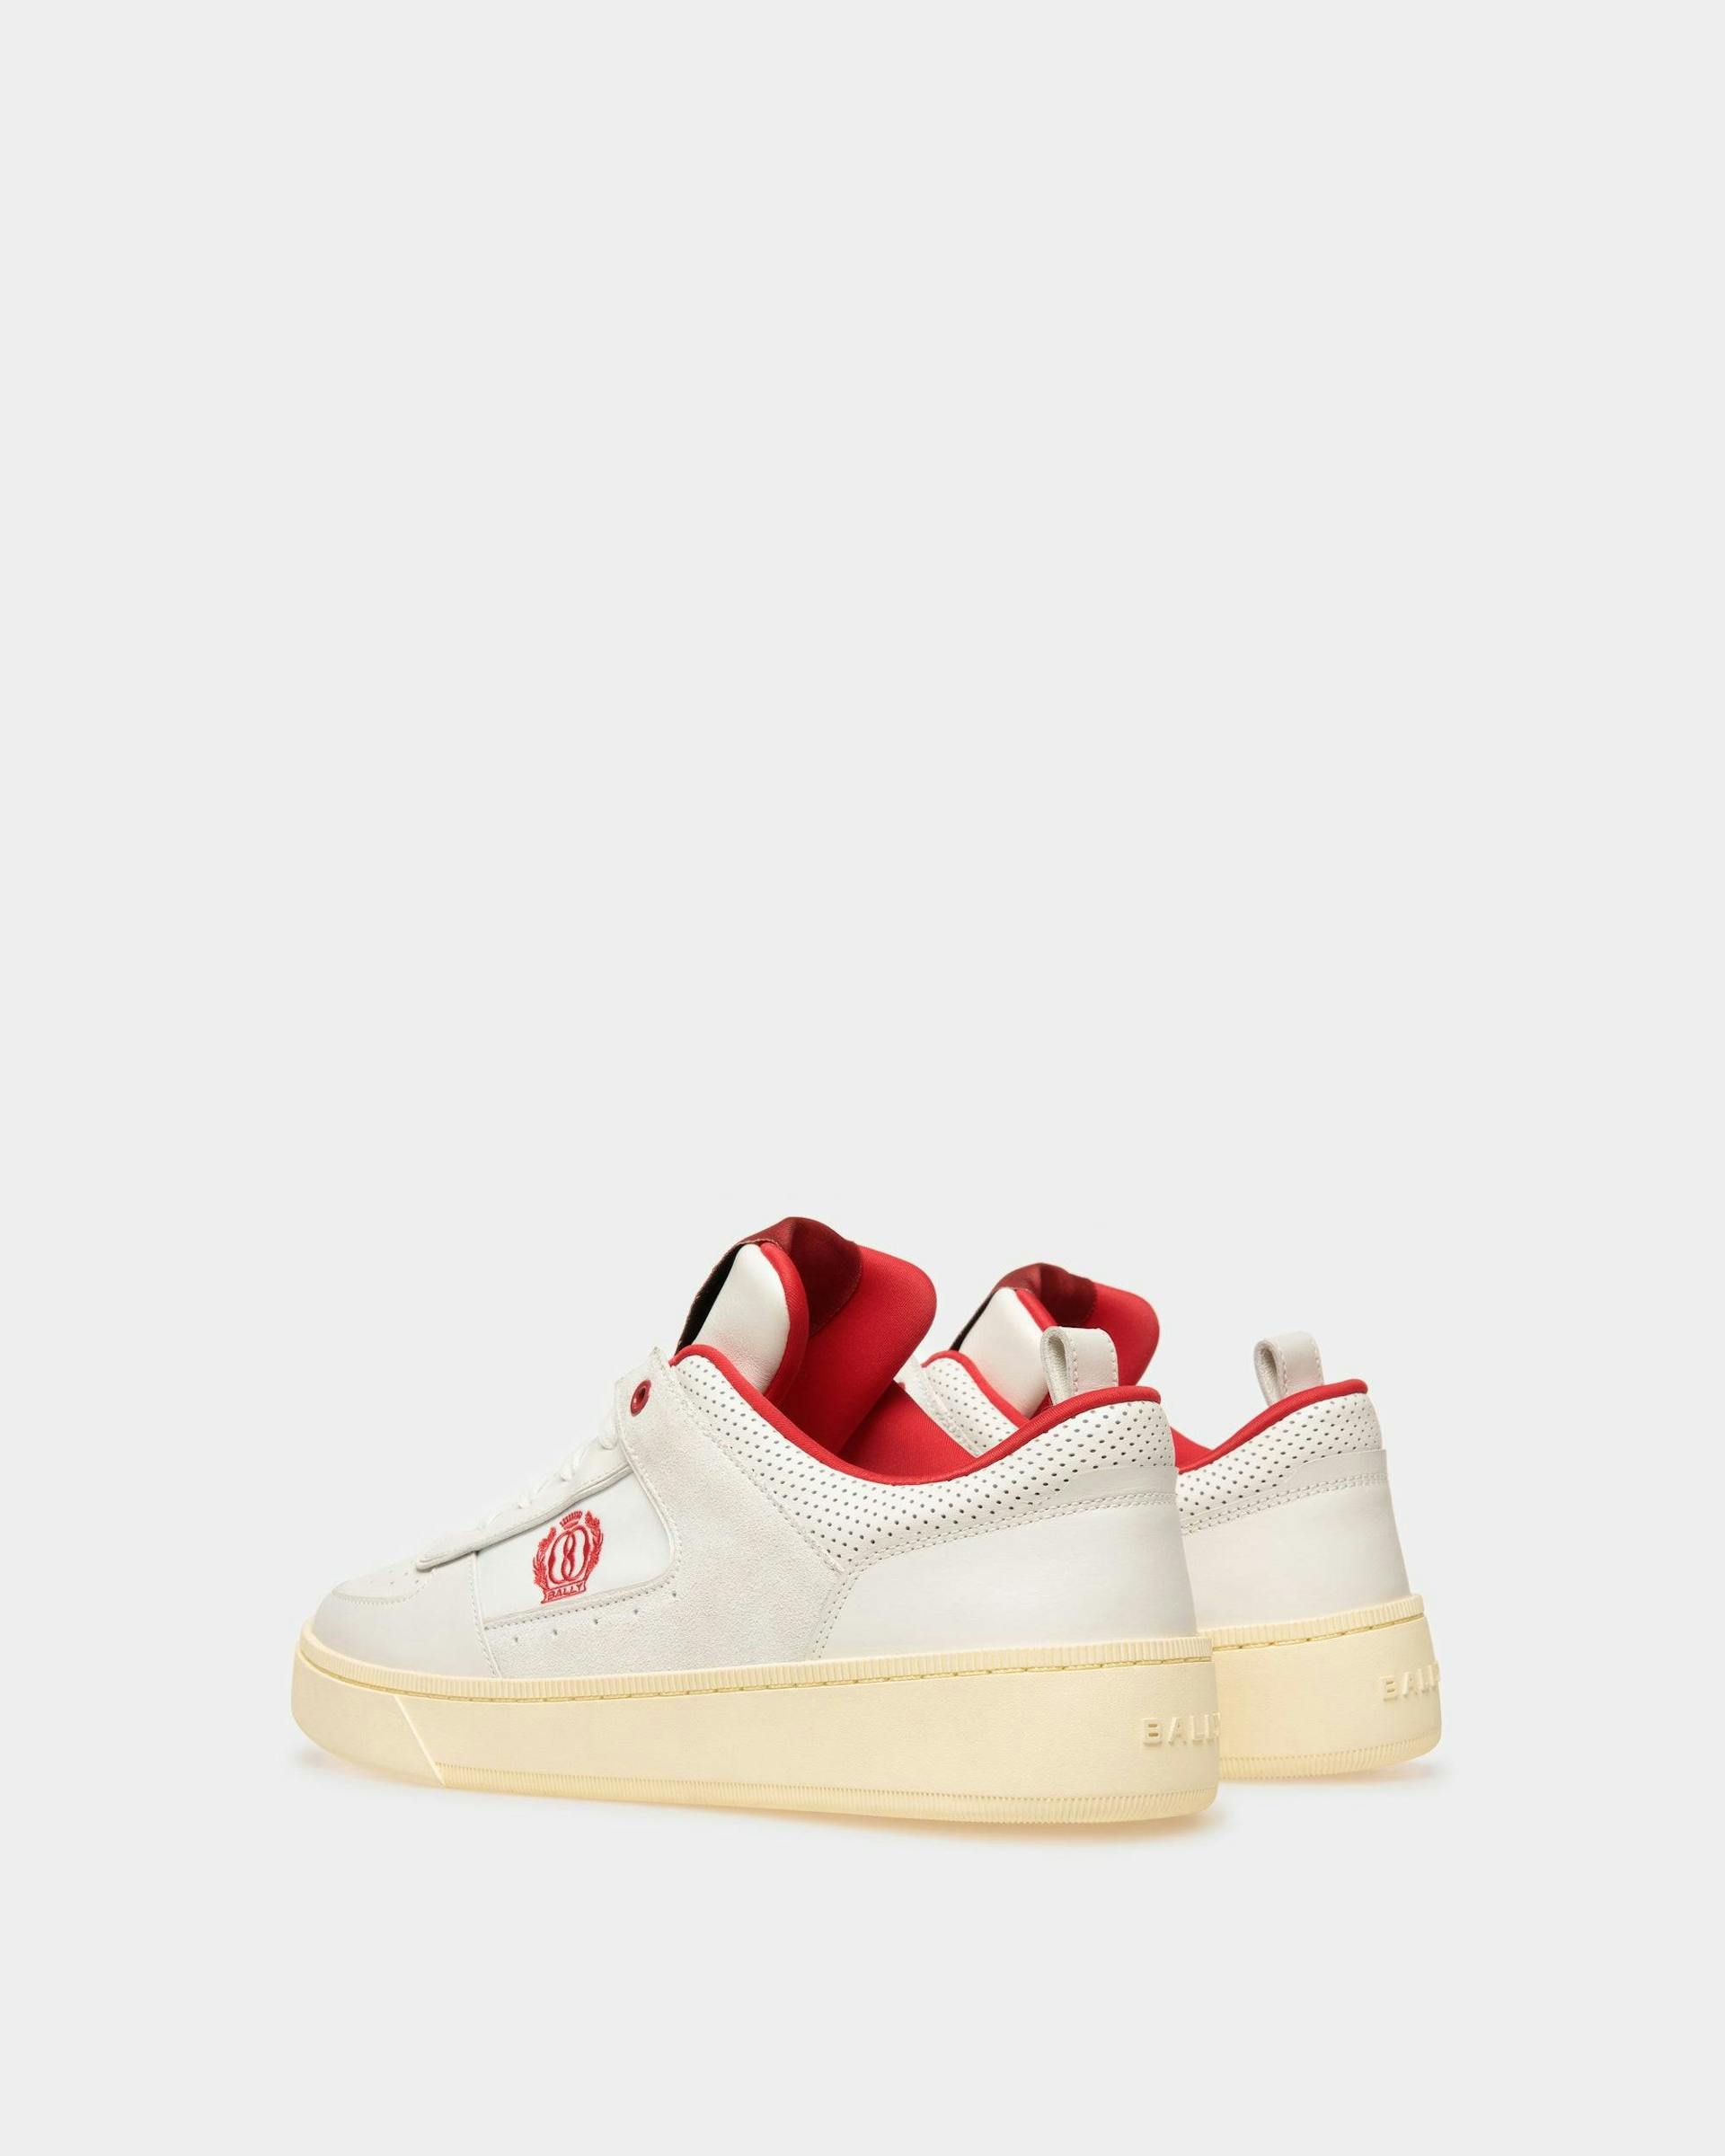 Raise Sneakers In White Leather - Men's - Bally - 03